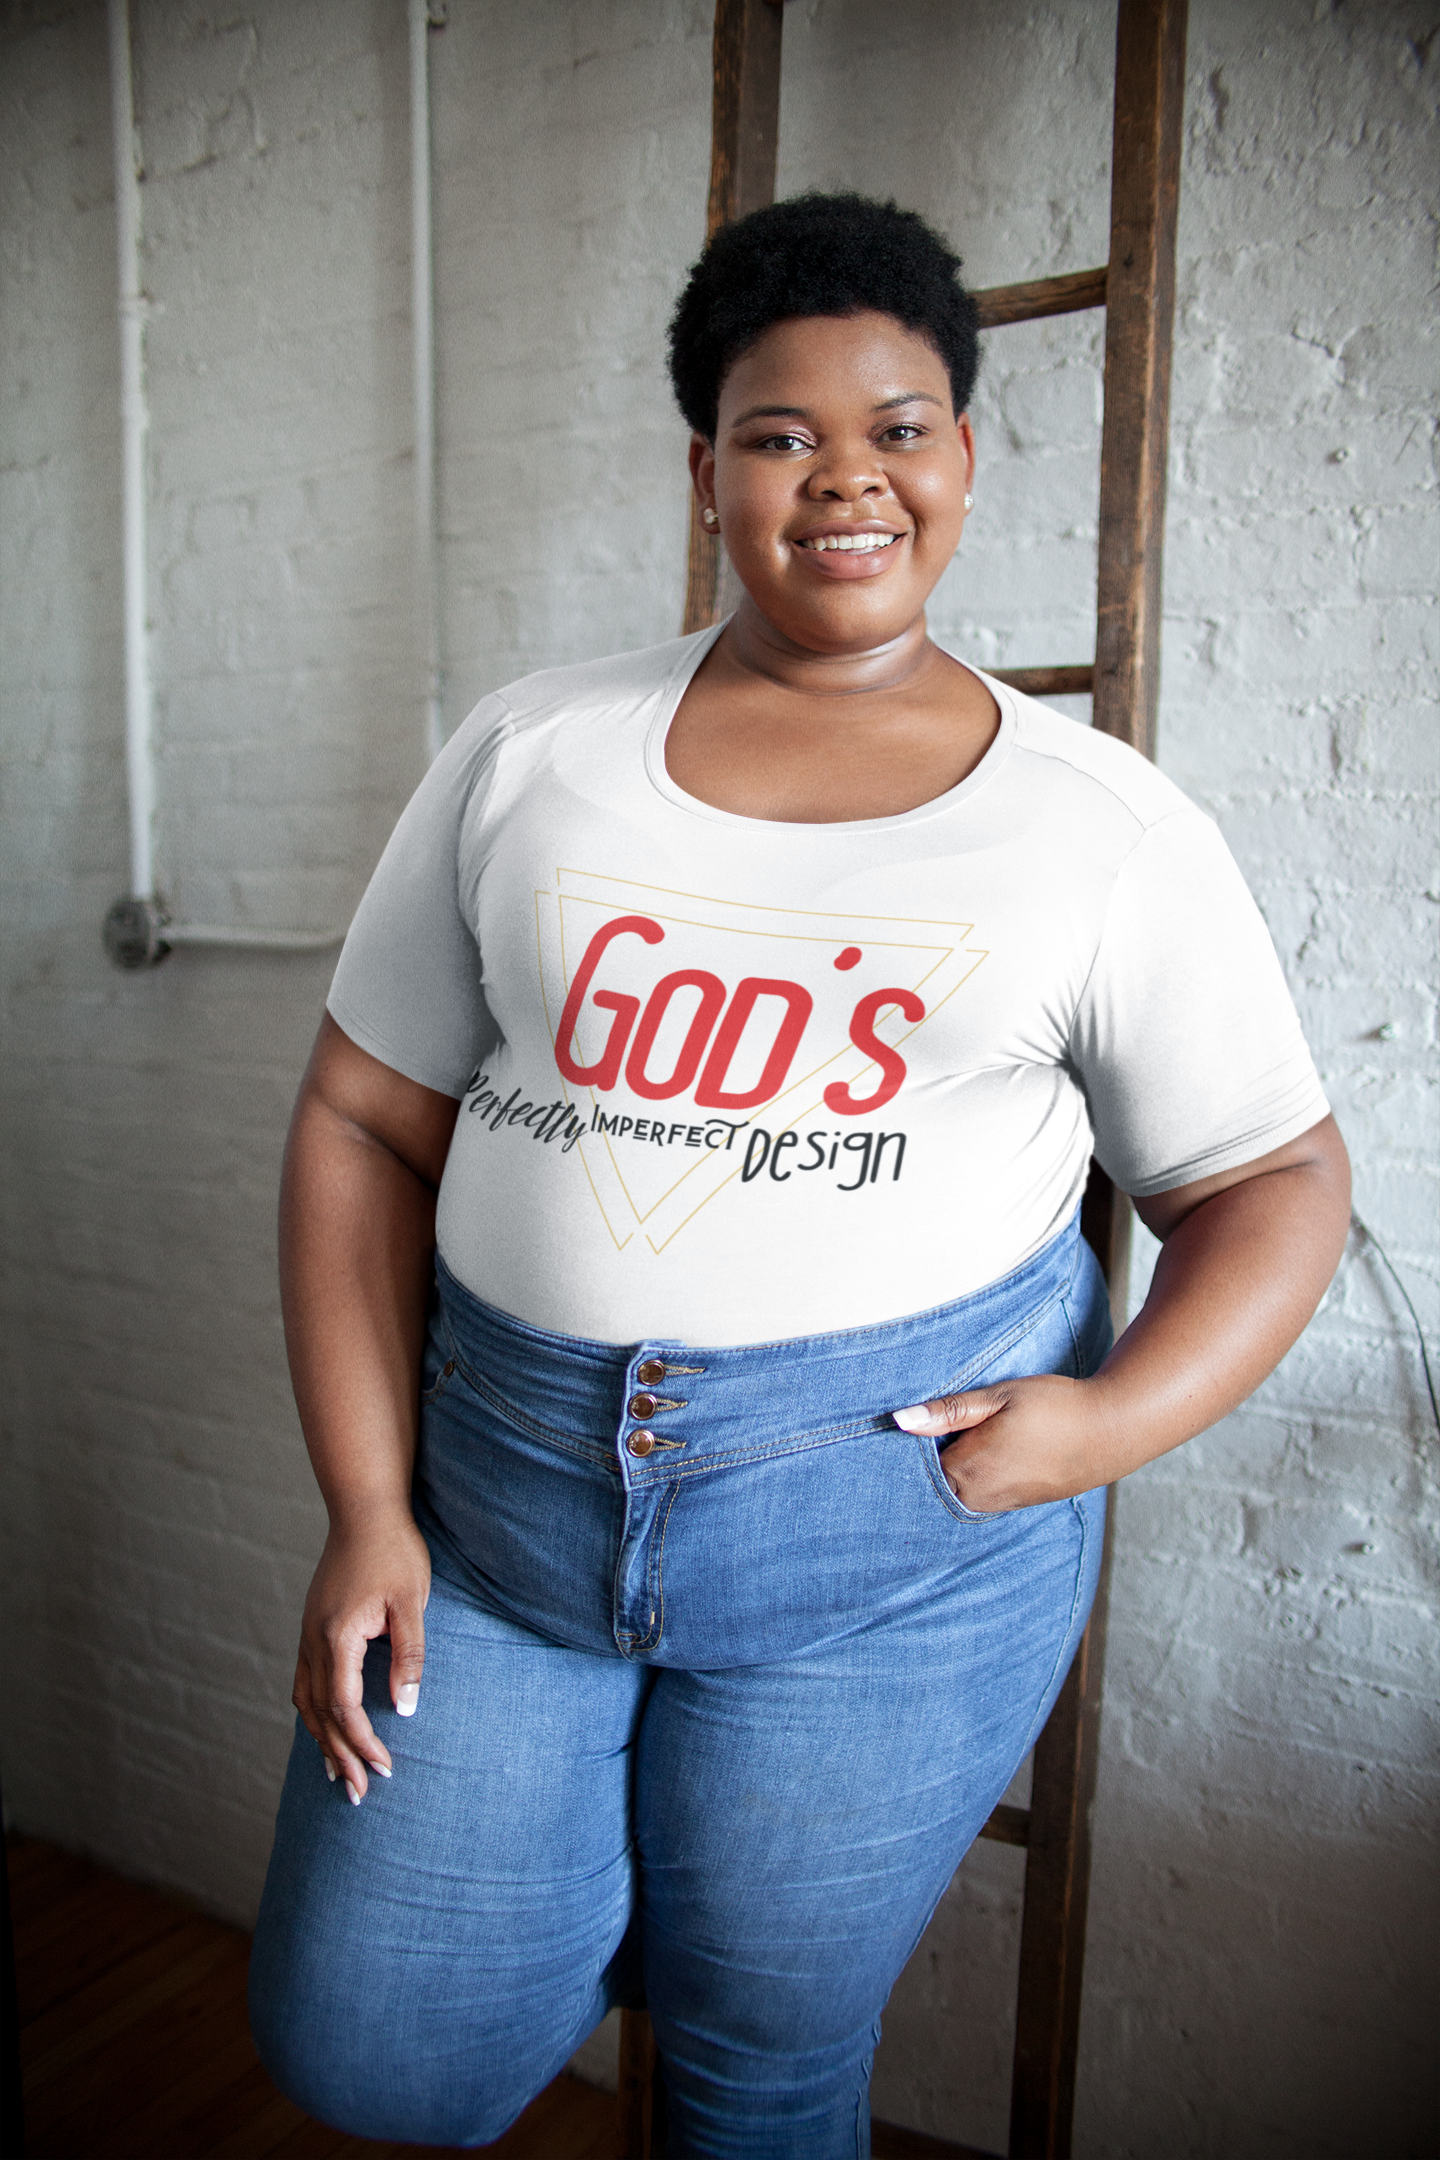 Unisex God's Perfectly Imperfect Design Tee